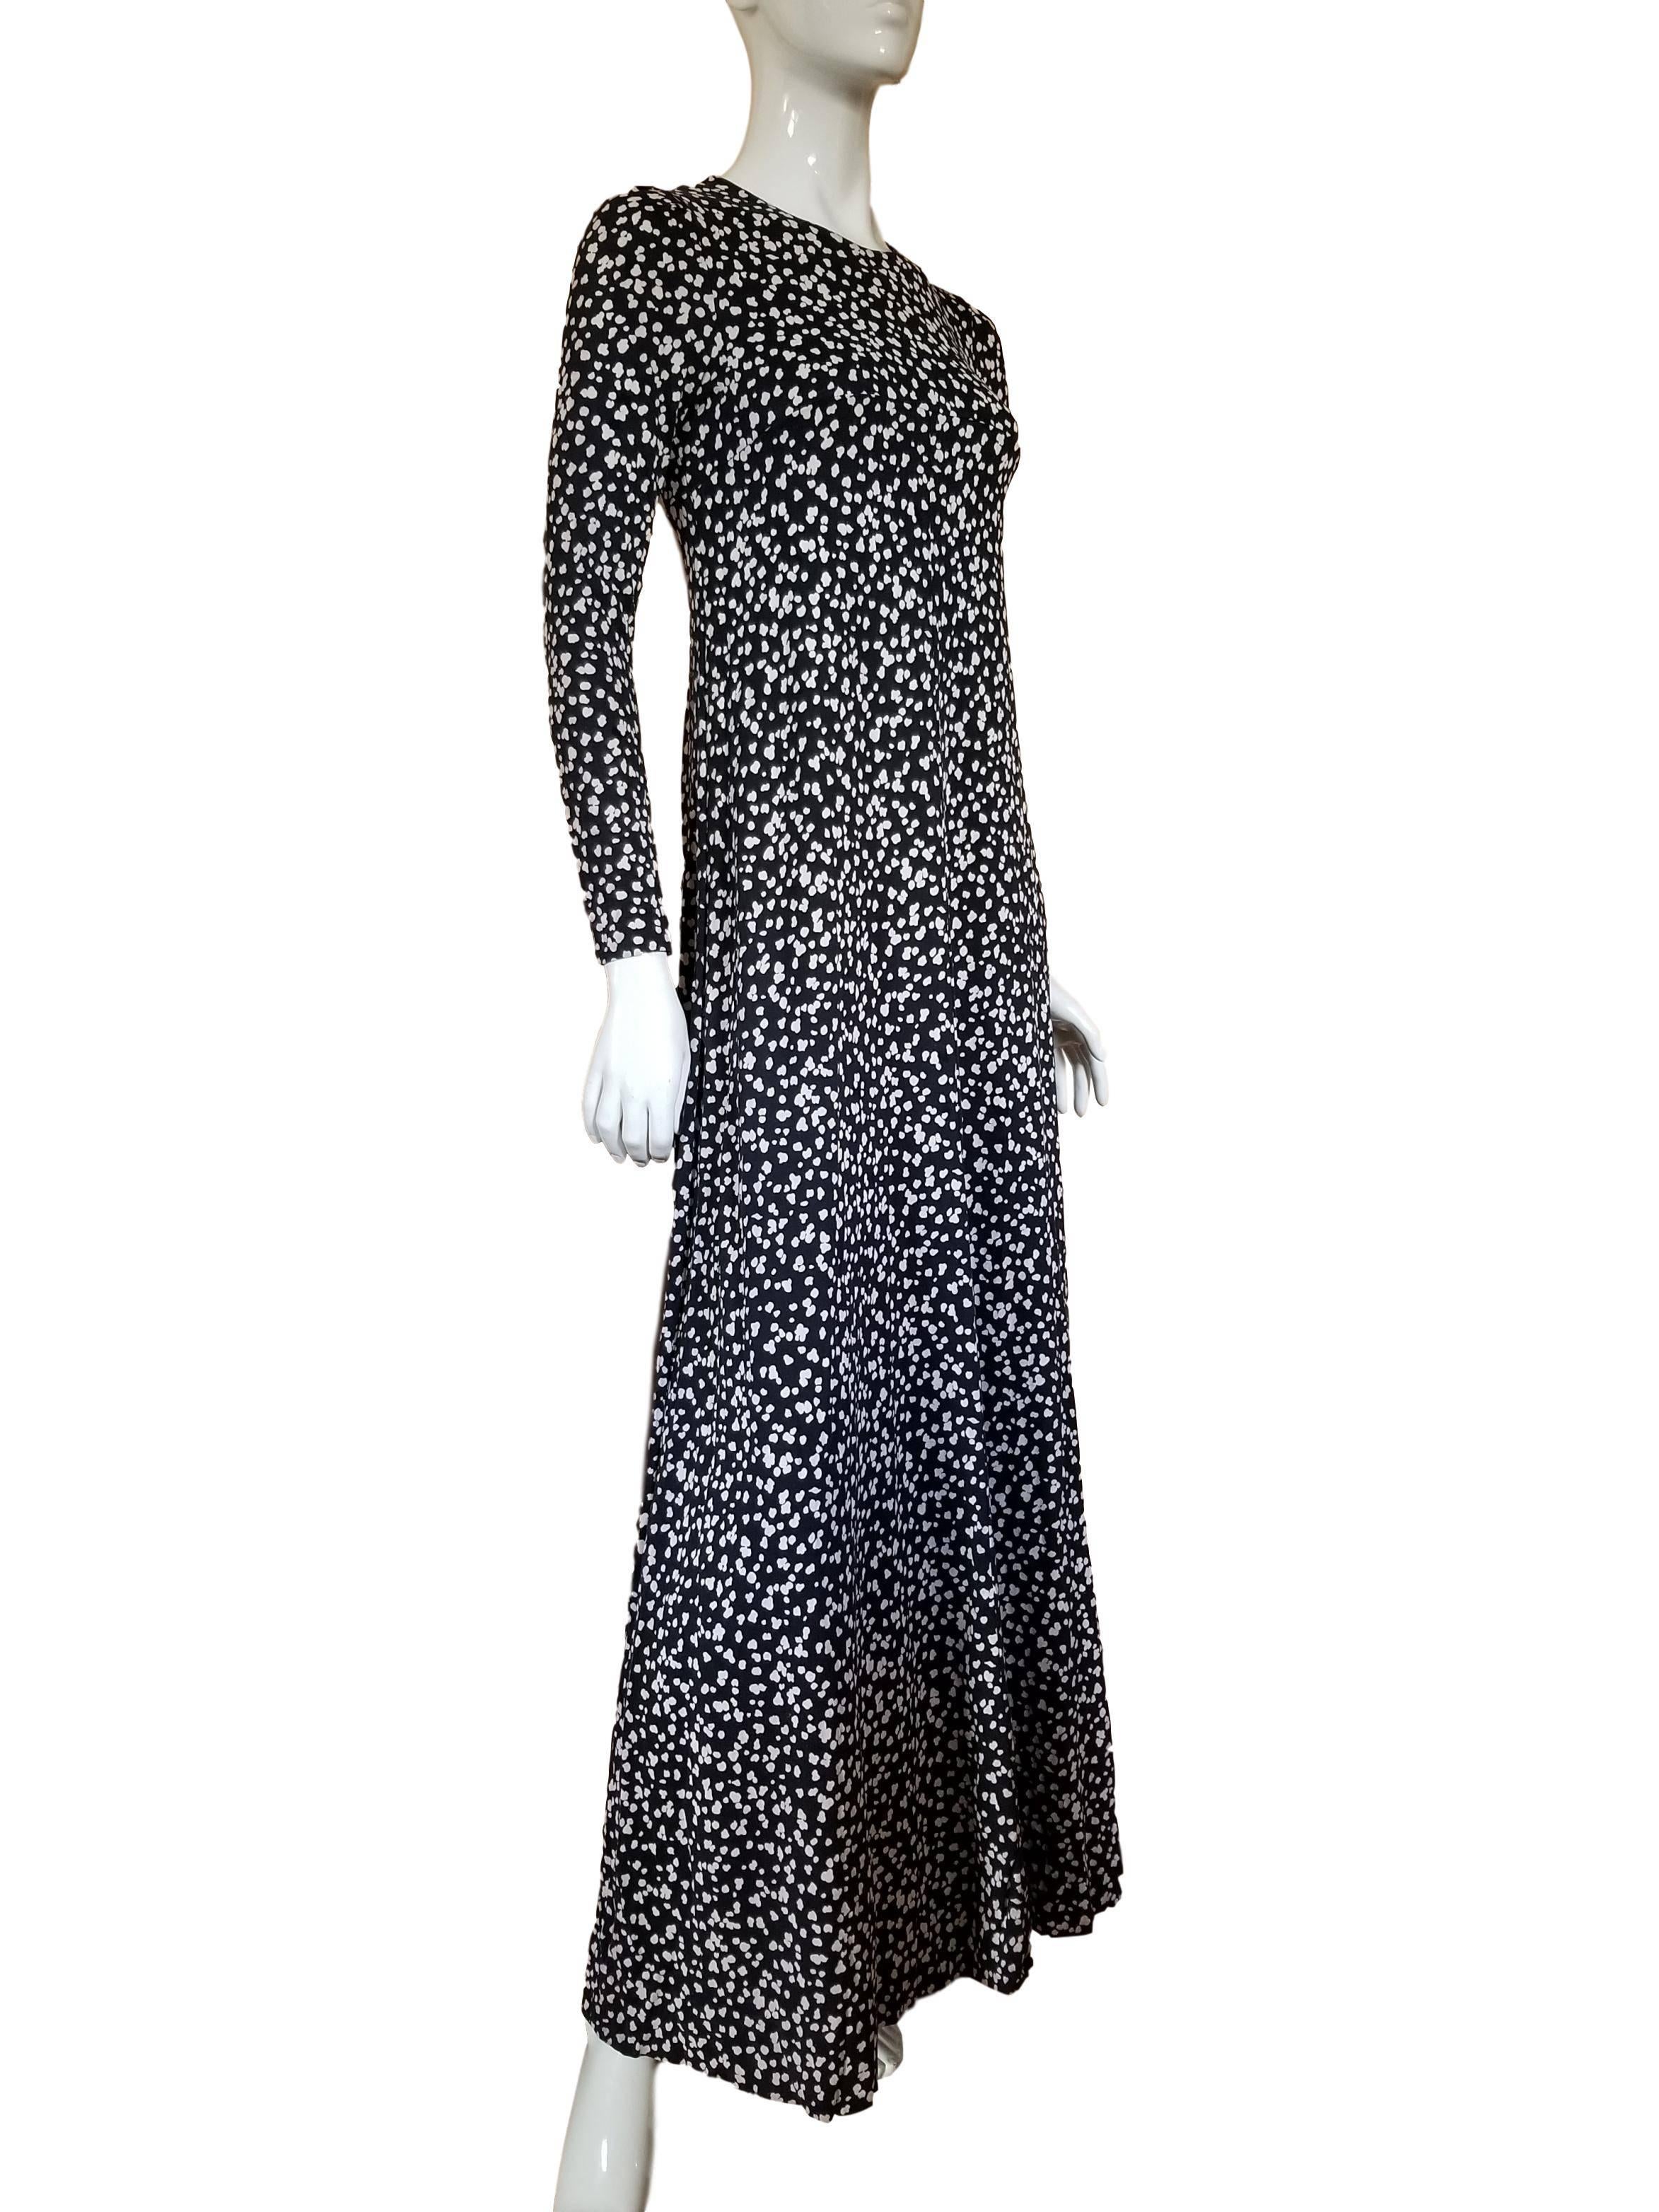 Diane Von Furstenberg early 1970s cotton and rayon blend navy blue maxi dress. With empire cut, The material is strong with a slight stretch.
Fastens at the back with a zip.

Excellent condition.

Measures 16 inches across bust will fit a 34 bust